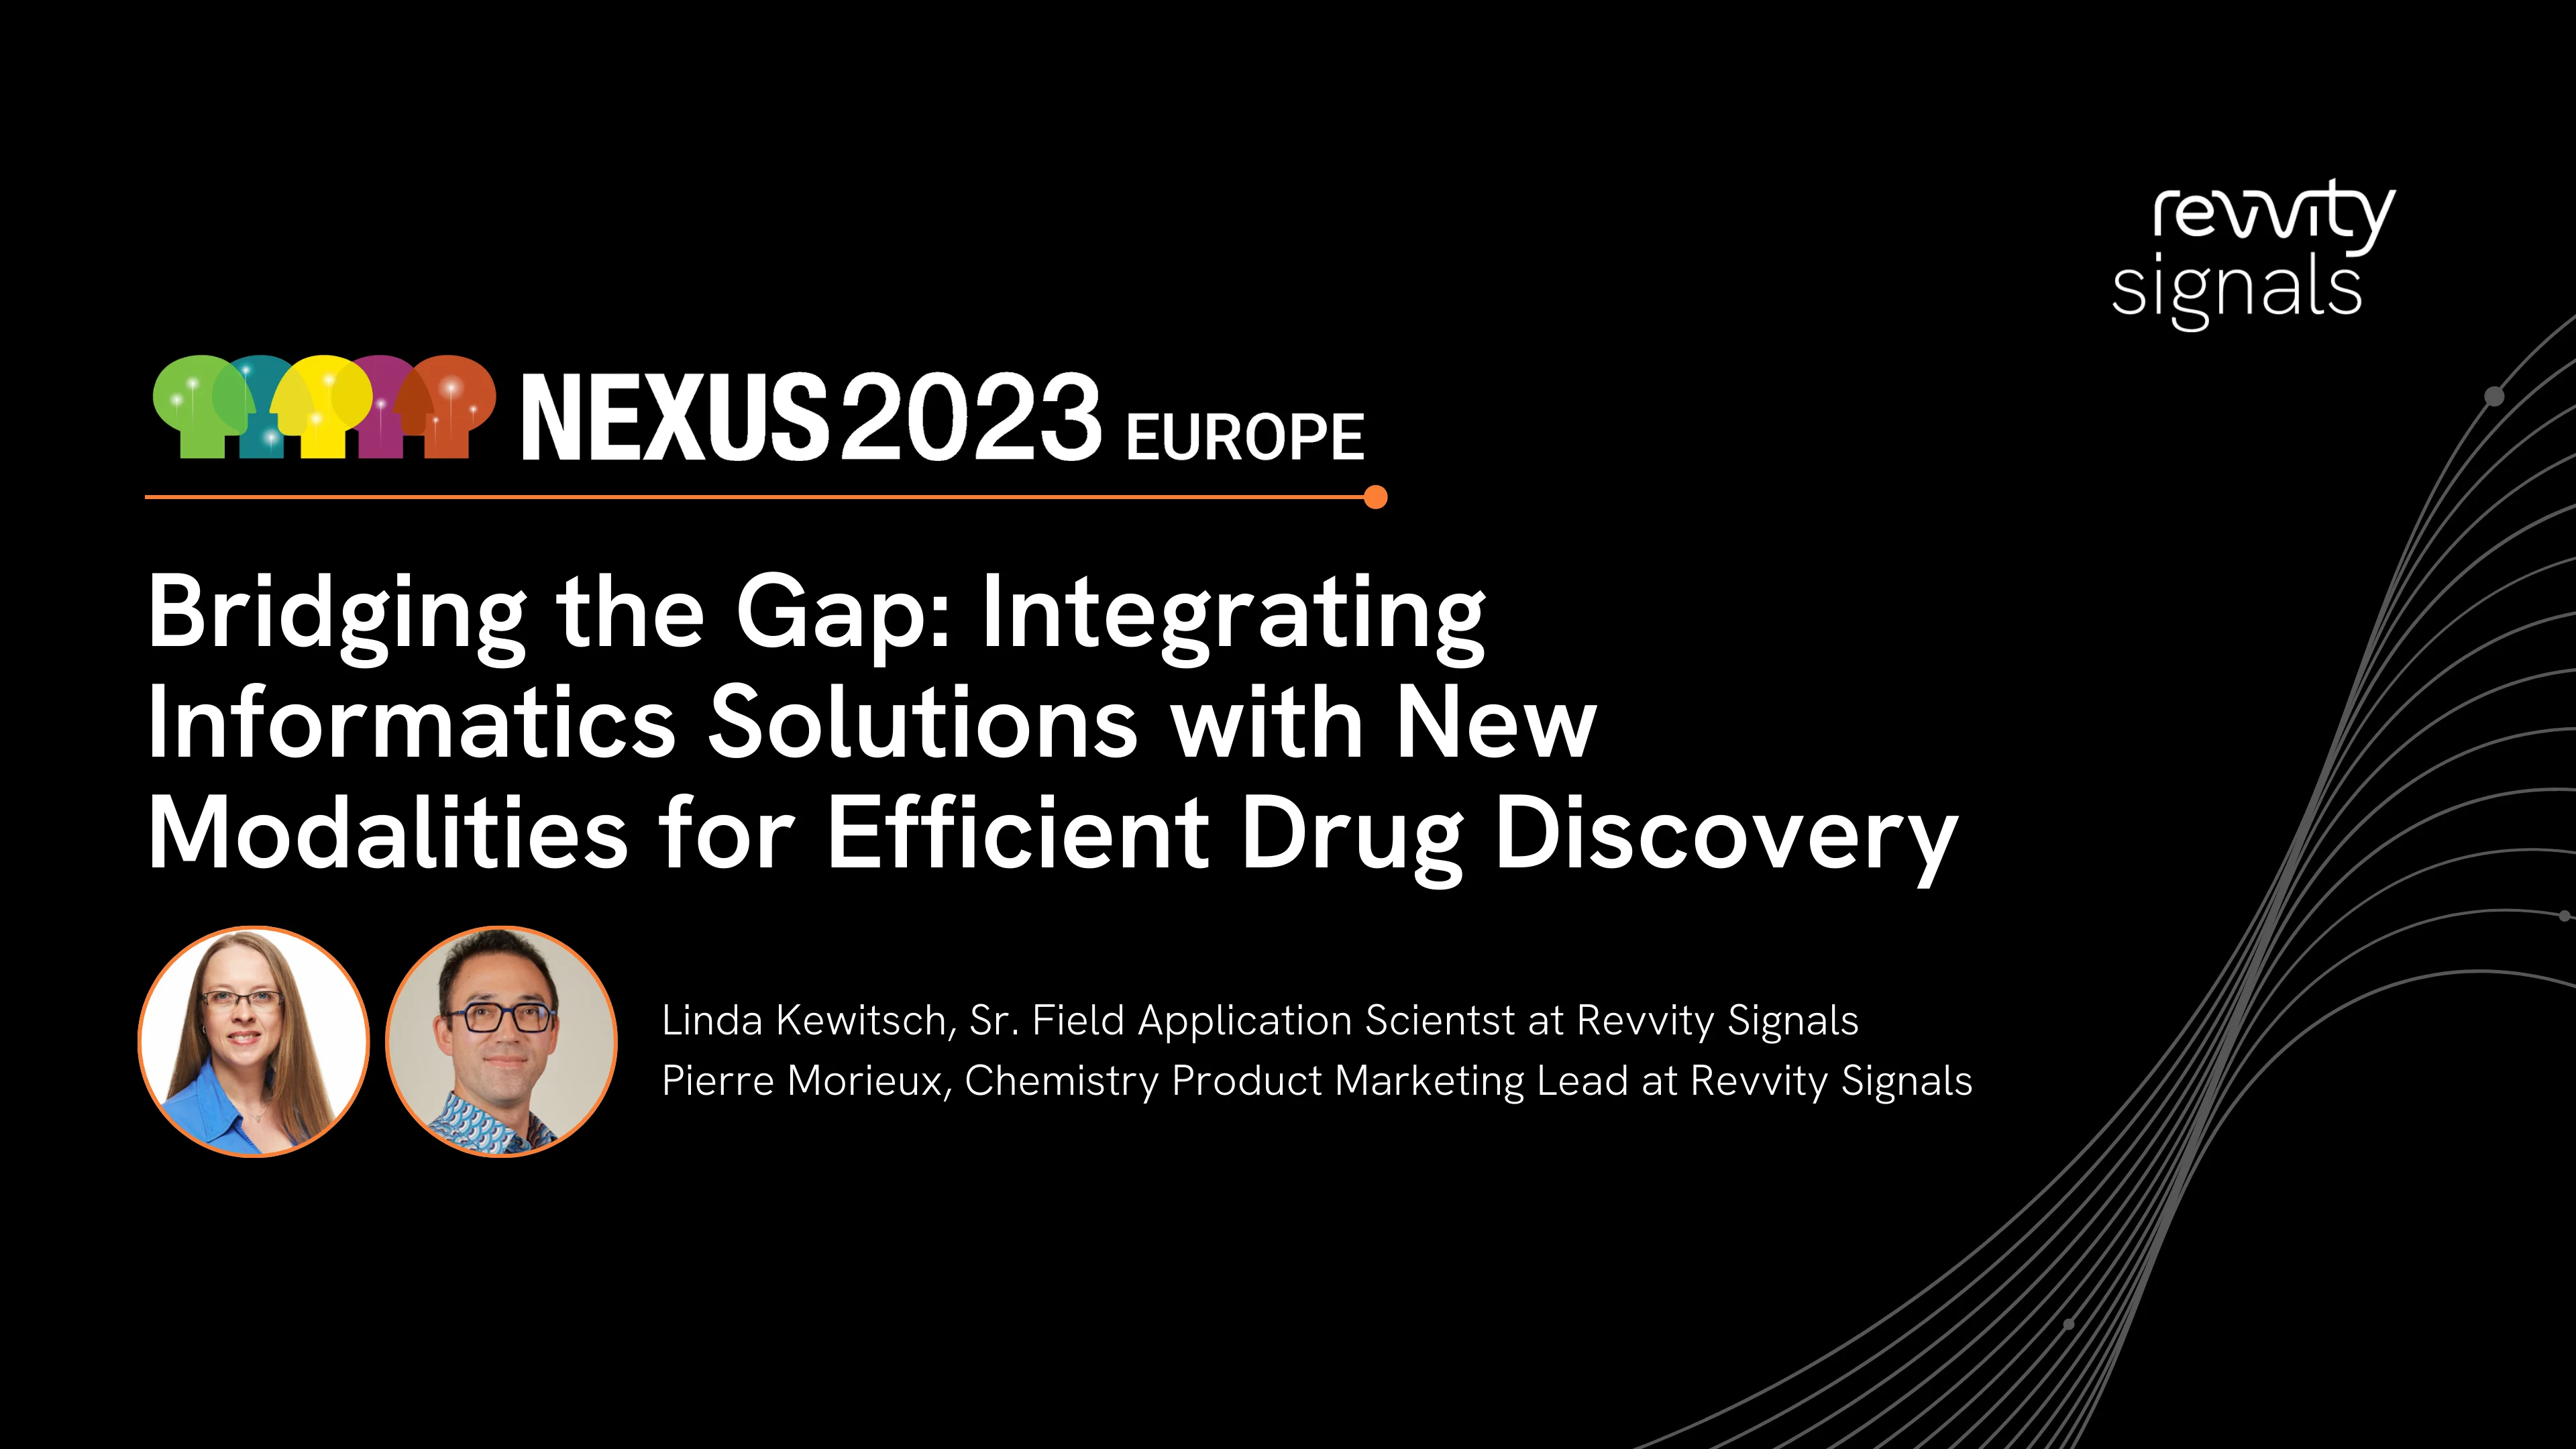 Watch Day 1, EU NEXUS 2023 - Bridging the Gap: Integrating Informatics Solutions with New Modalities for Efficient Drug Discovery on Vimeo.